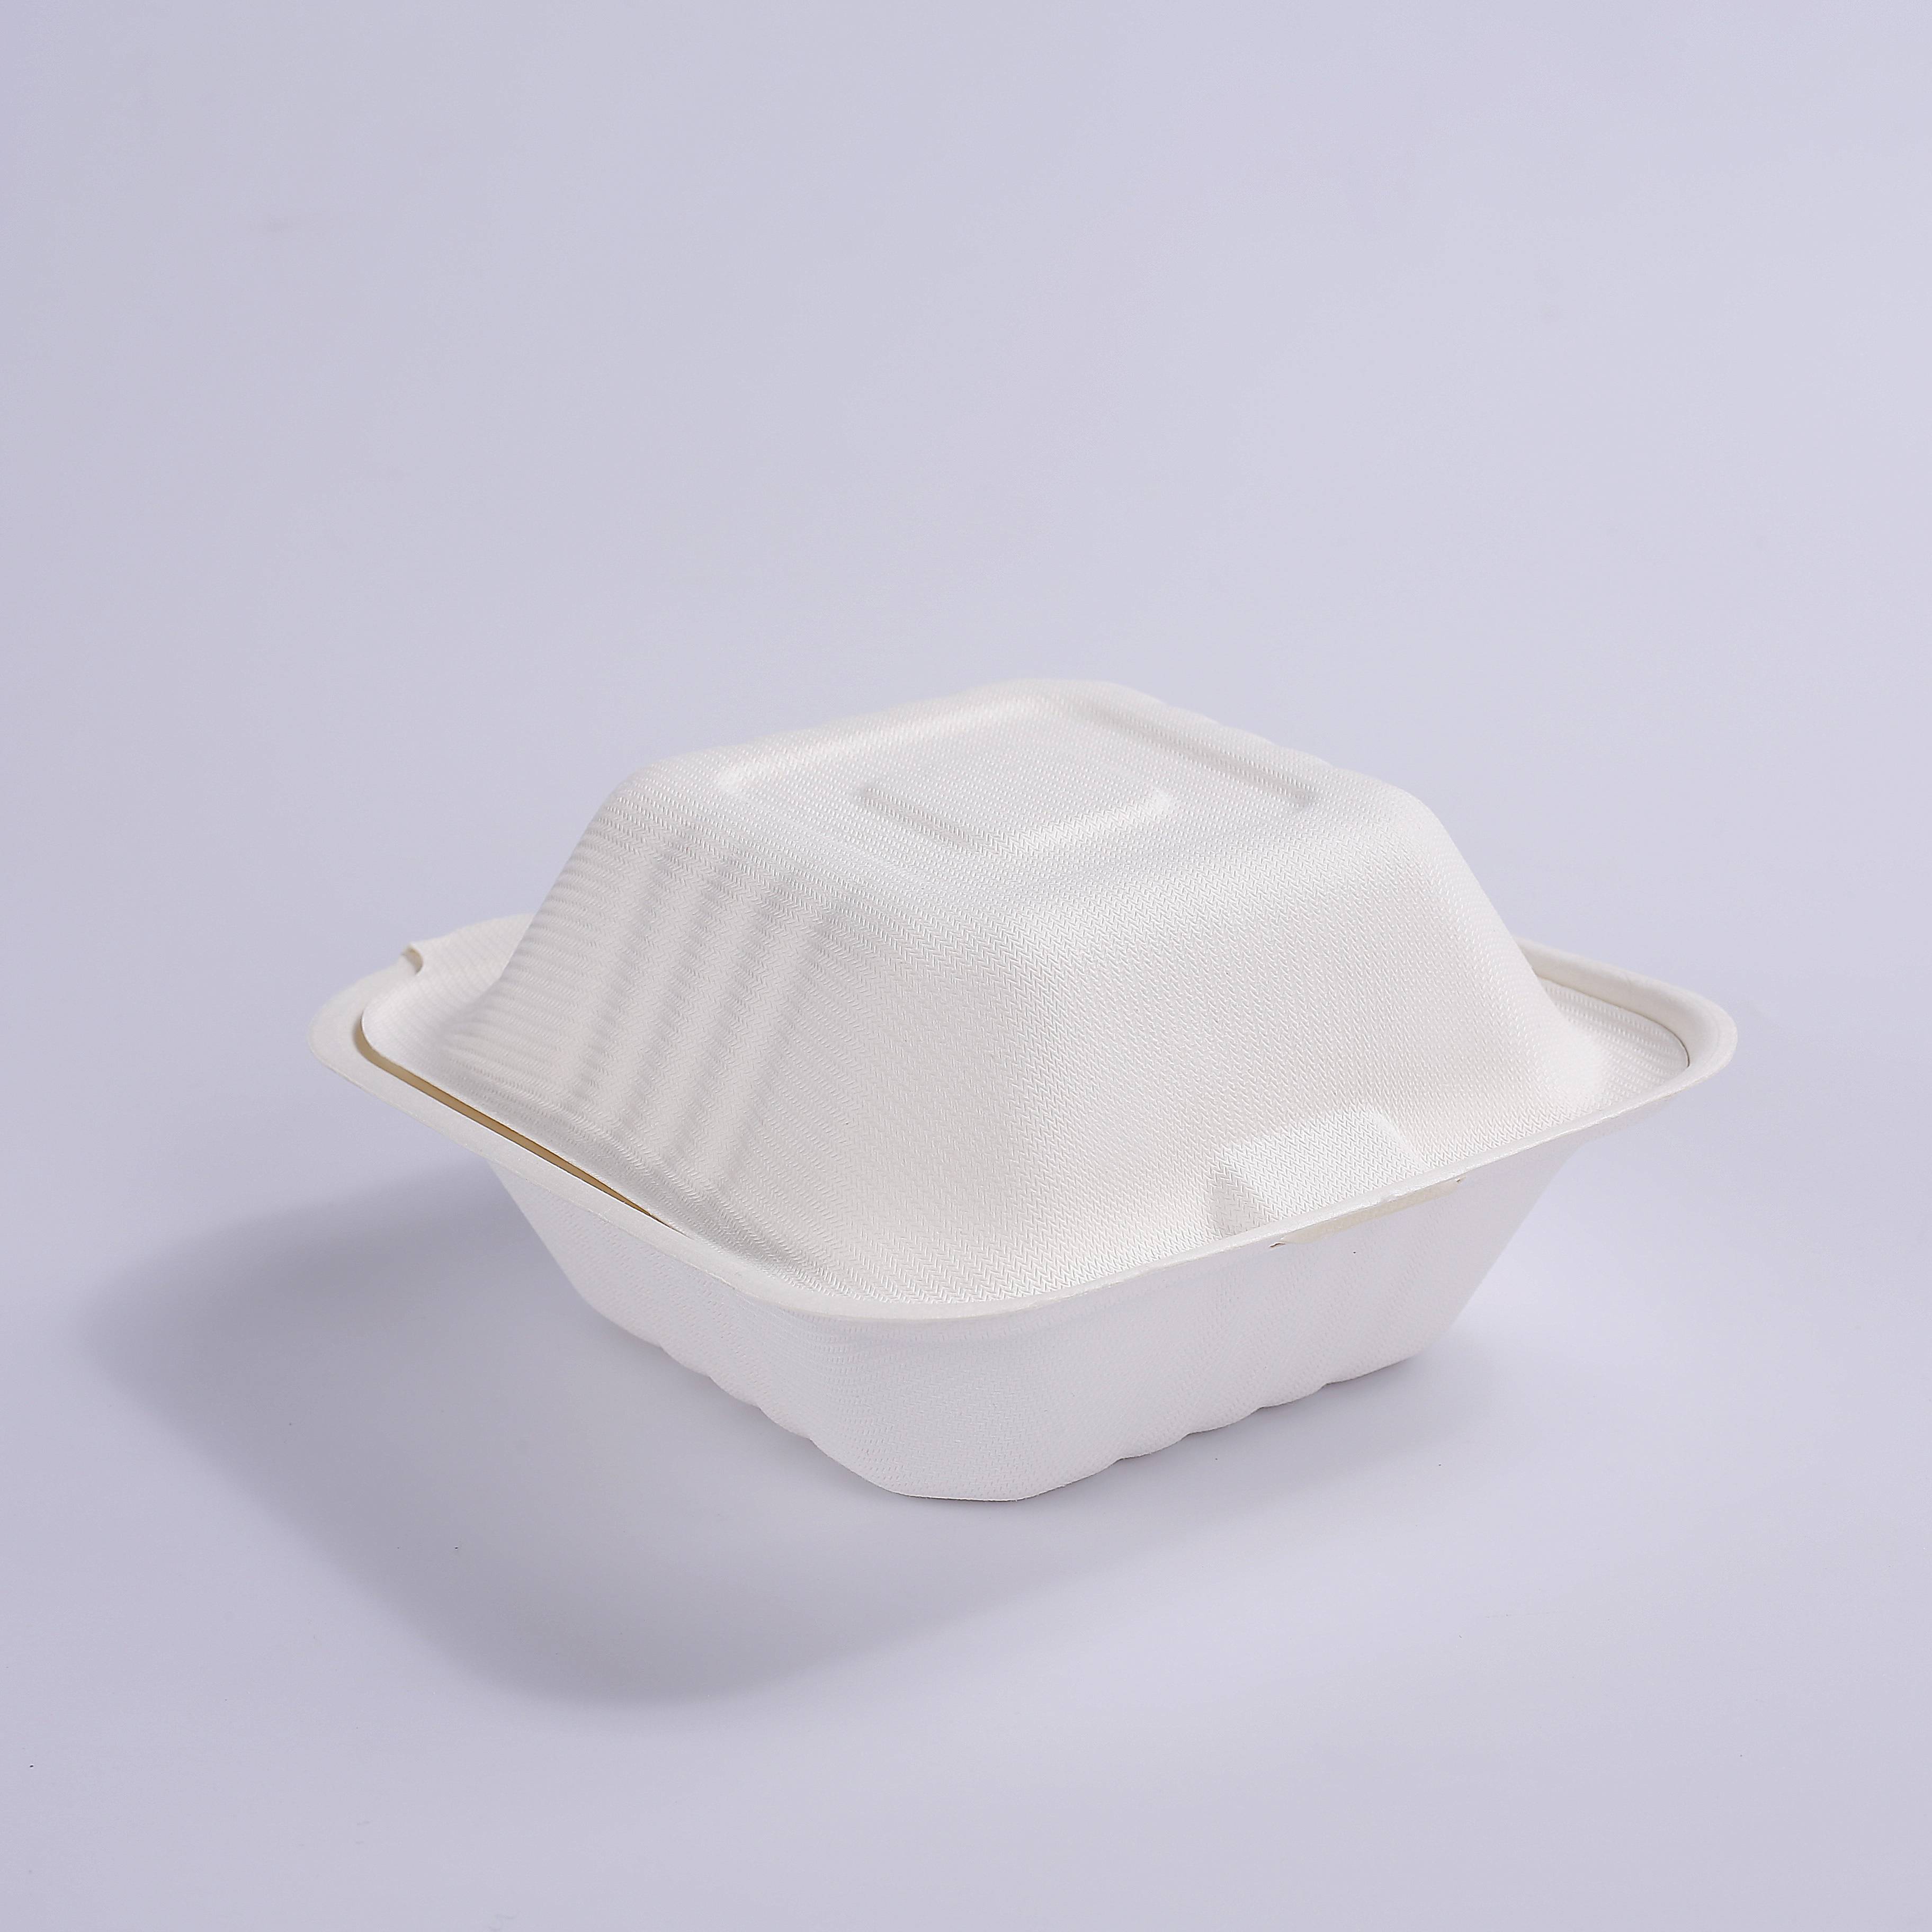 Wholesale Sugarcane Pulp - Bagasse 6*6″ Clamshell Takeout Containers, Biodegradable Eco Friendly Take Out to Go Food Containers with Lids for Lunch Leftover Meal Prep Storage, Microwave and ...